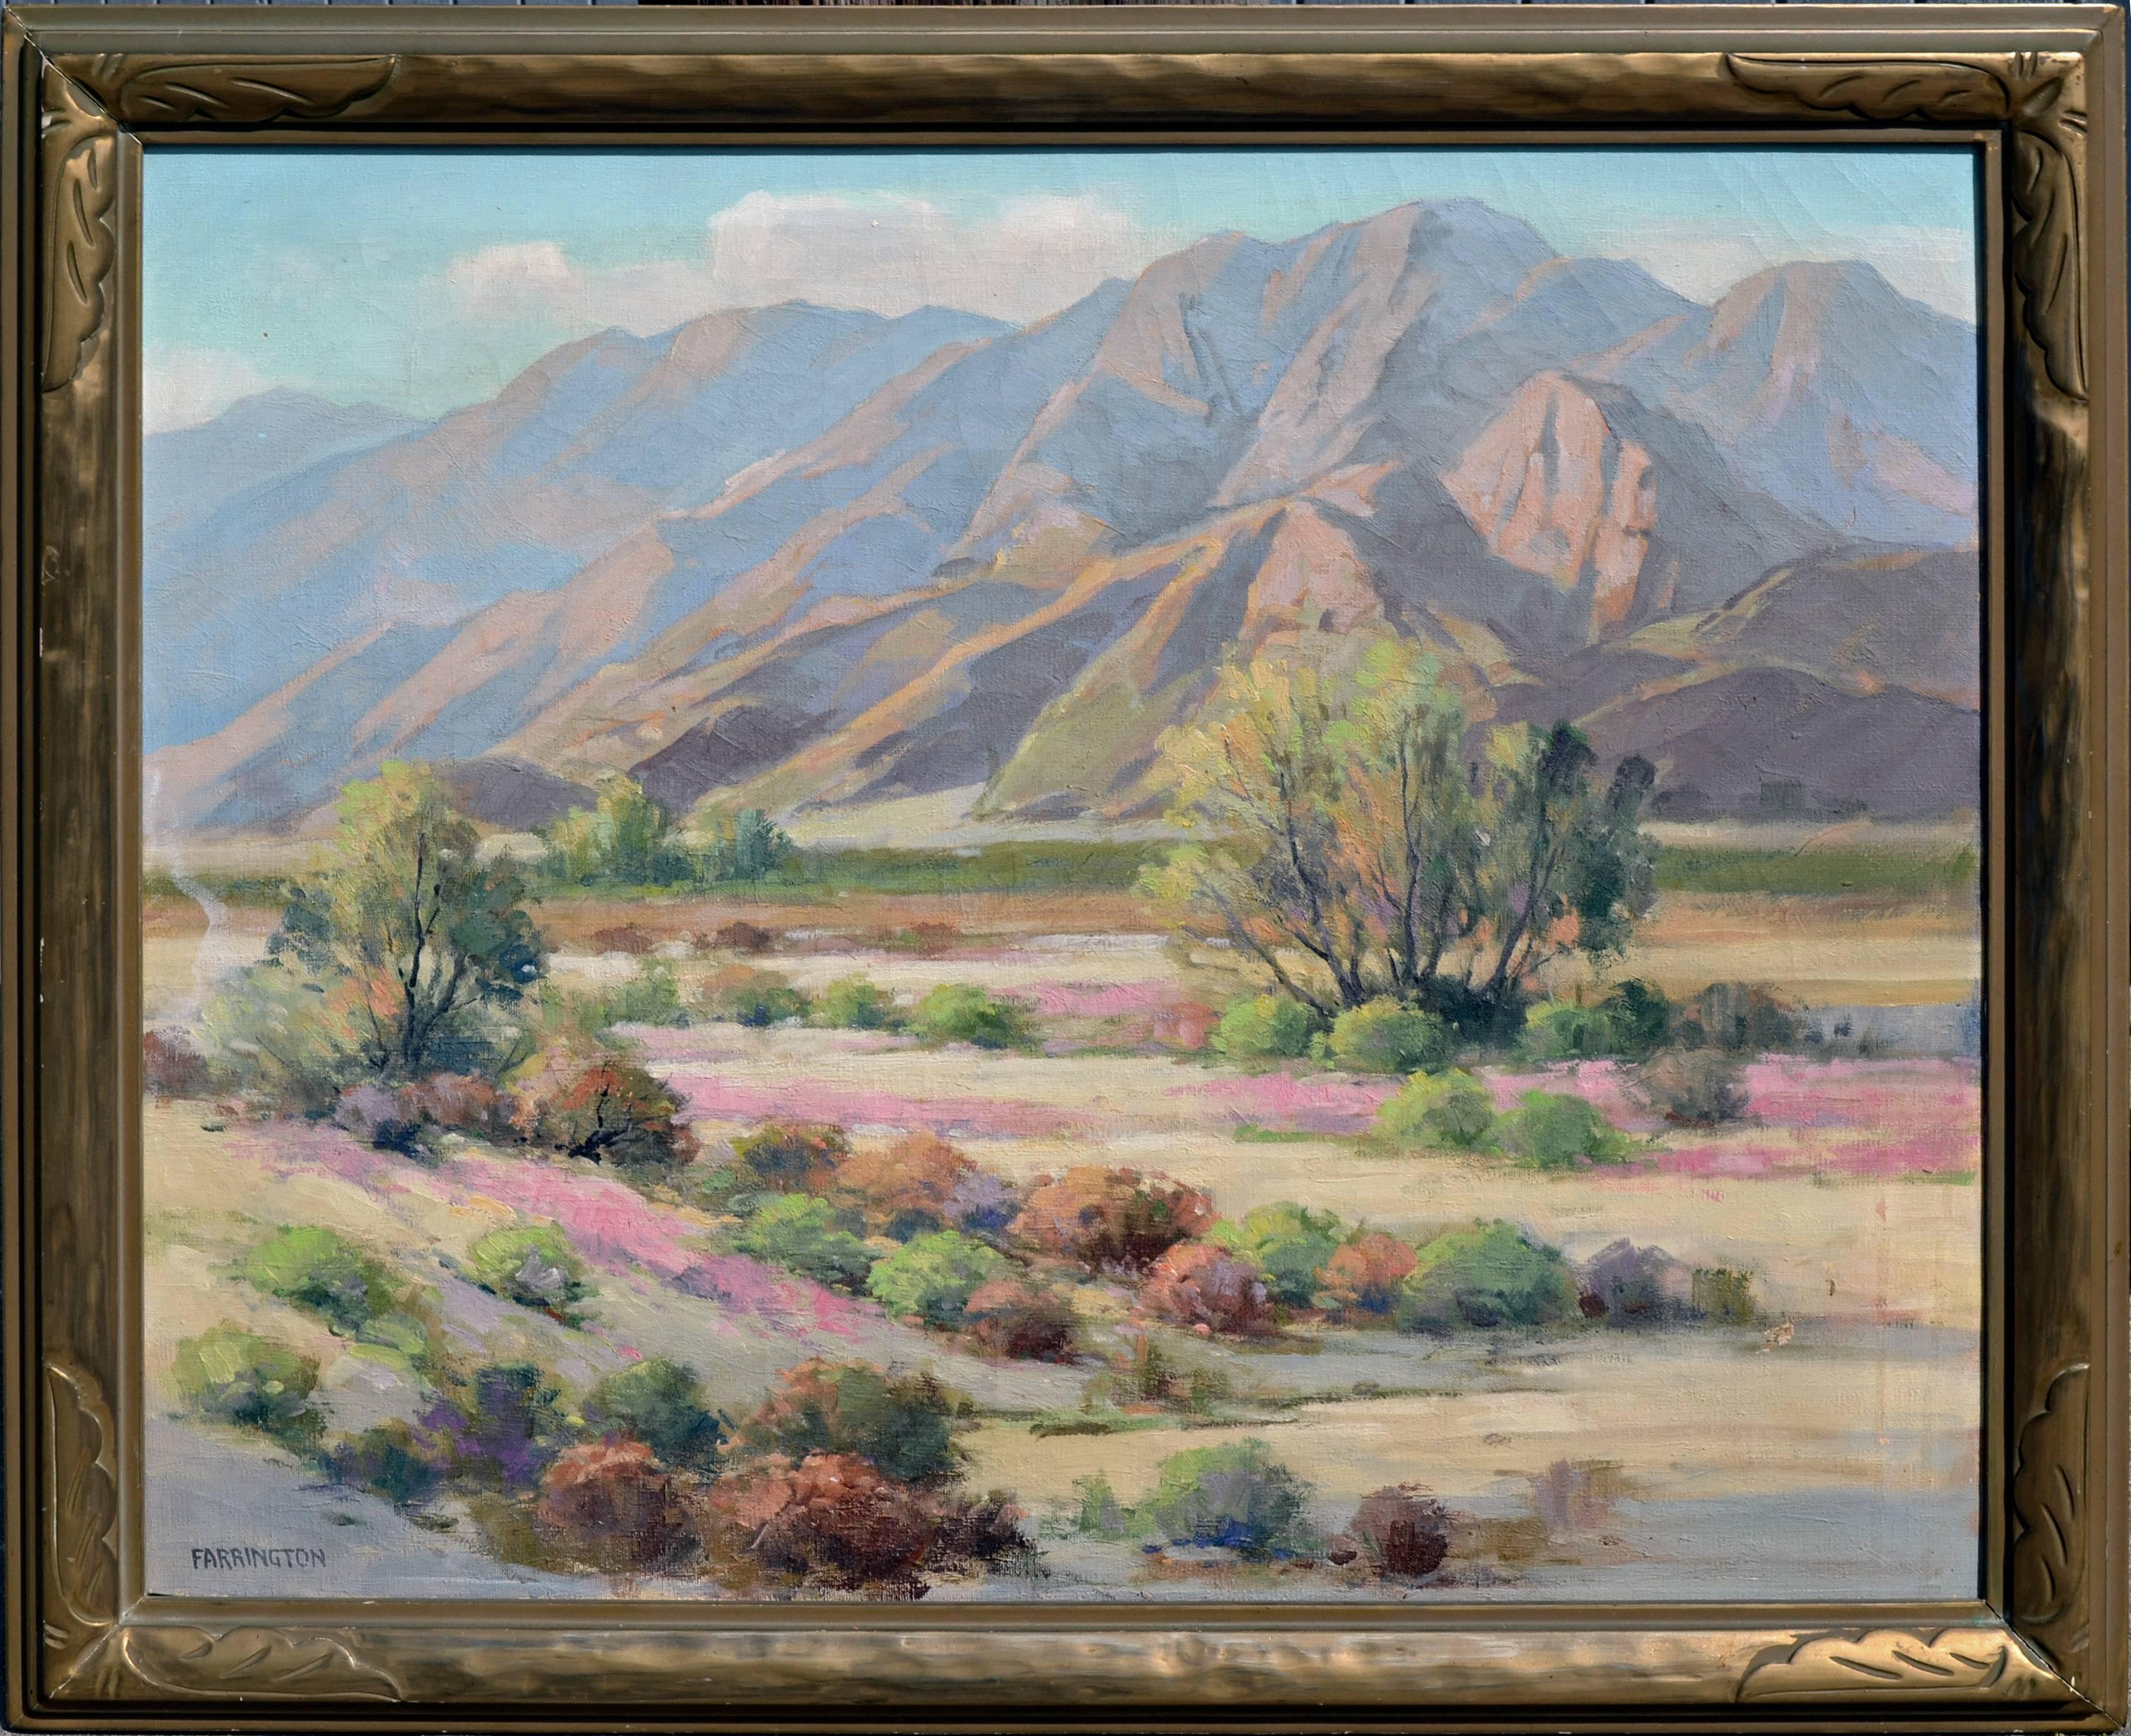 1930s Smoke Tree Ranch Desert Landscape  - Painting by Walter Farrington Moses